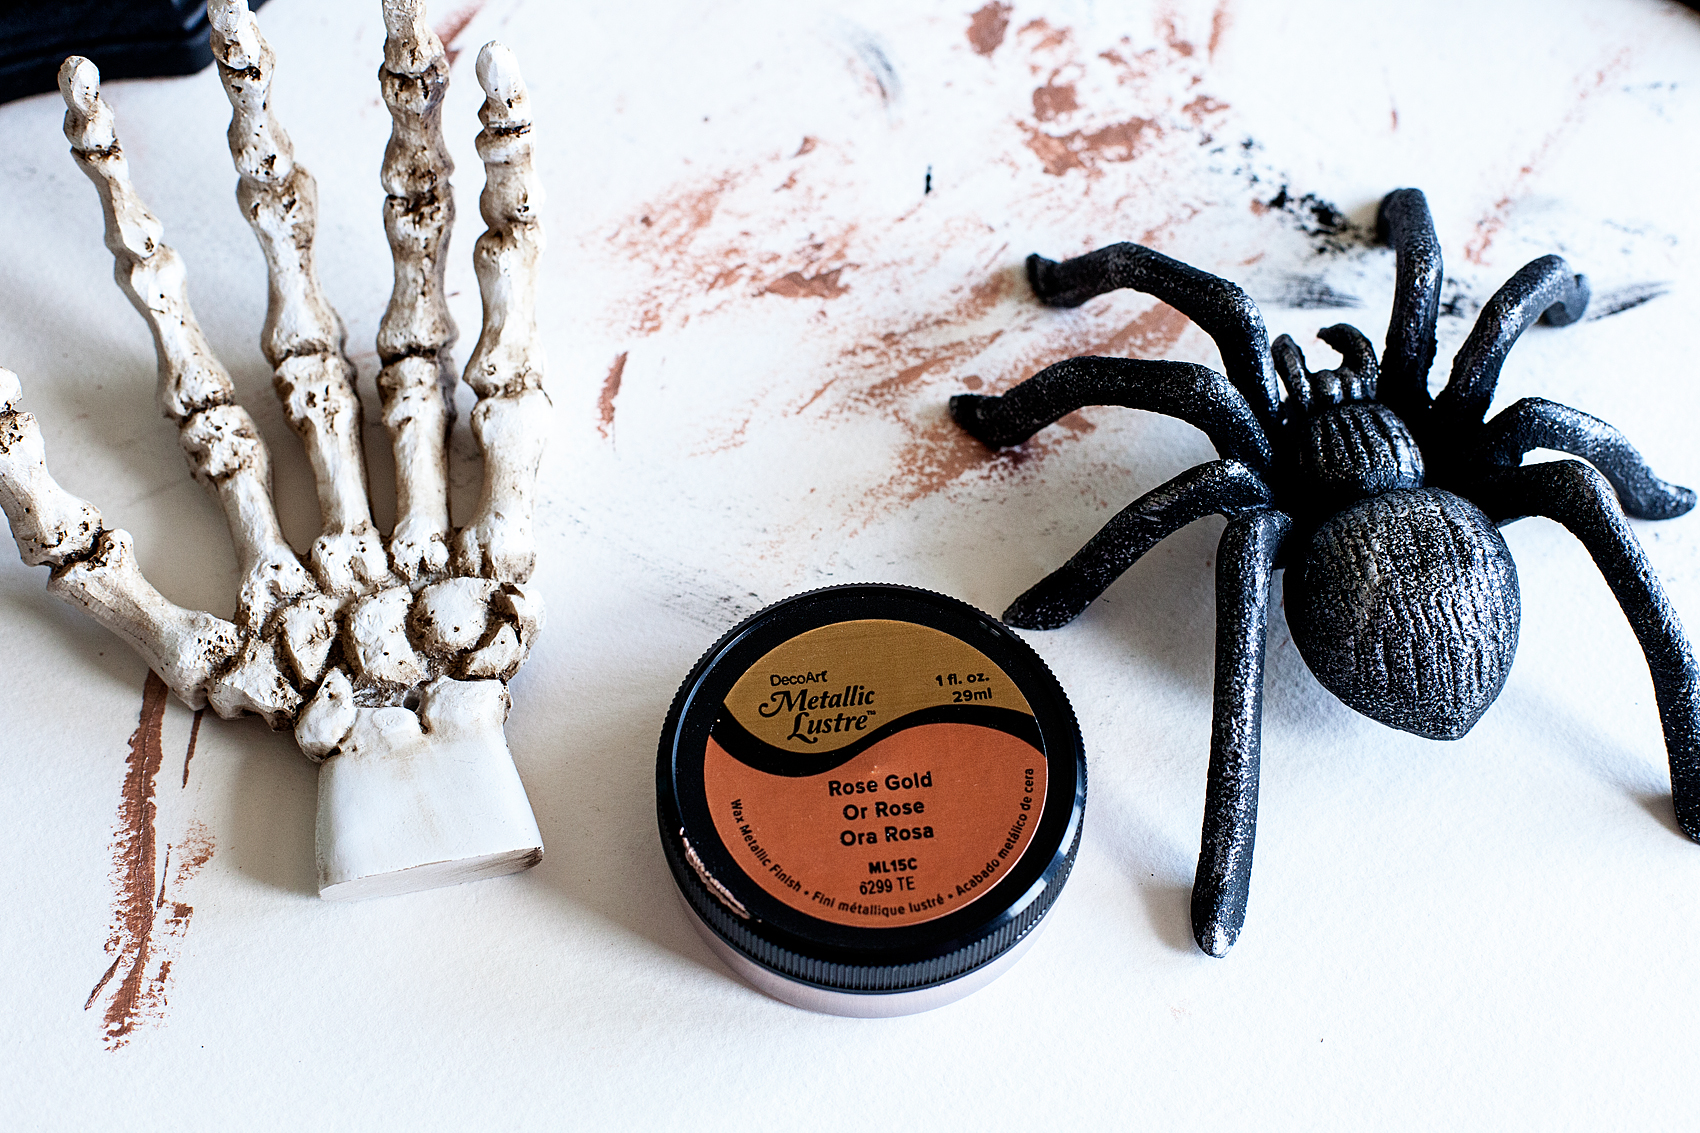 Add a little flair to your spooky Halloween decor with DecoArt! I used their Metallic Lustre to turn simple spooky objects into creepy yet classy taxidermy plaques to decorate our entryway for Halloween.